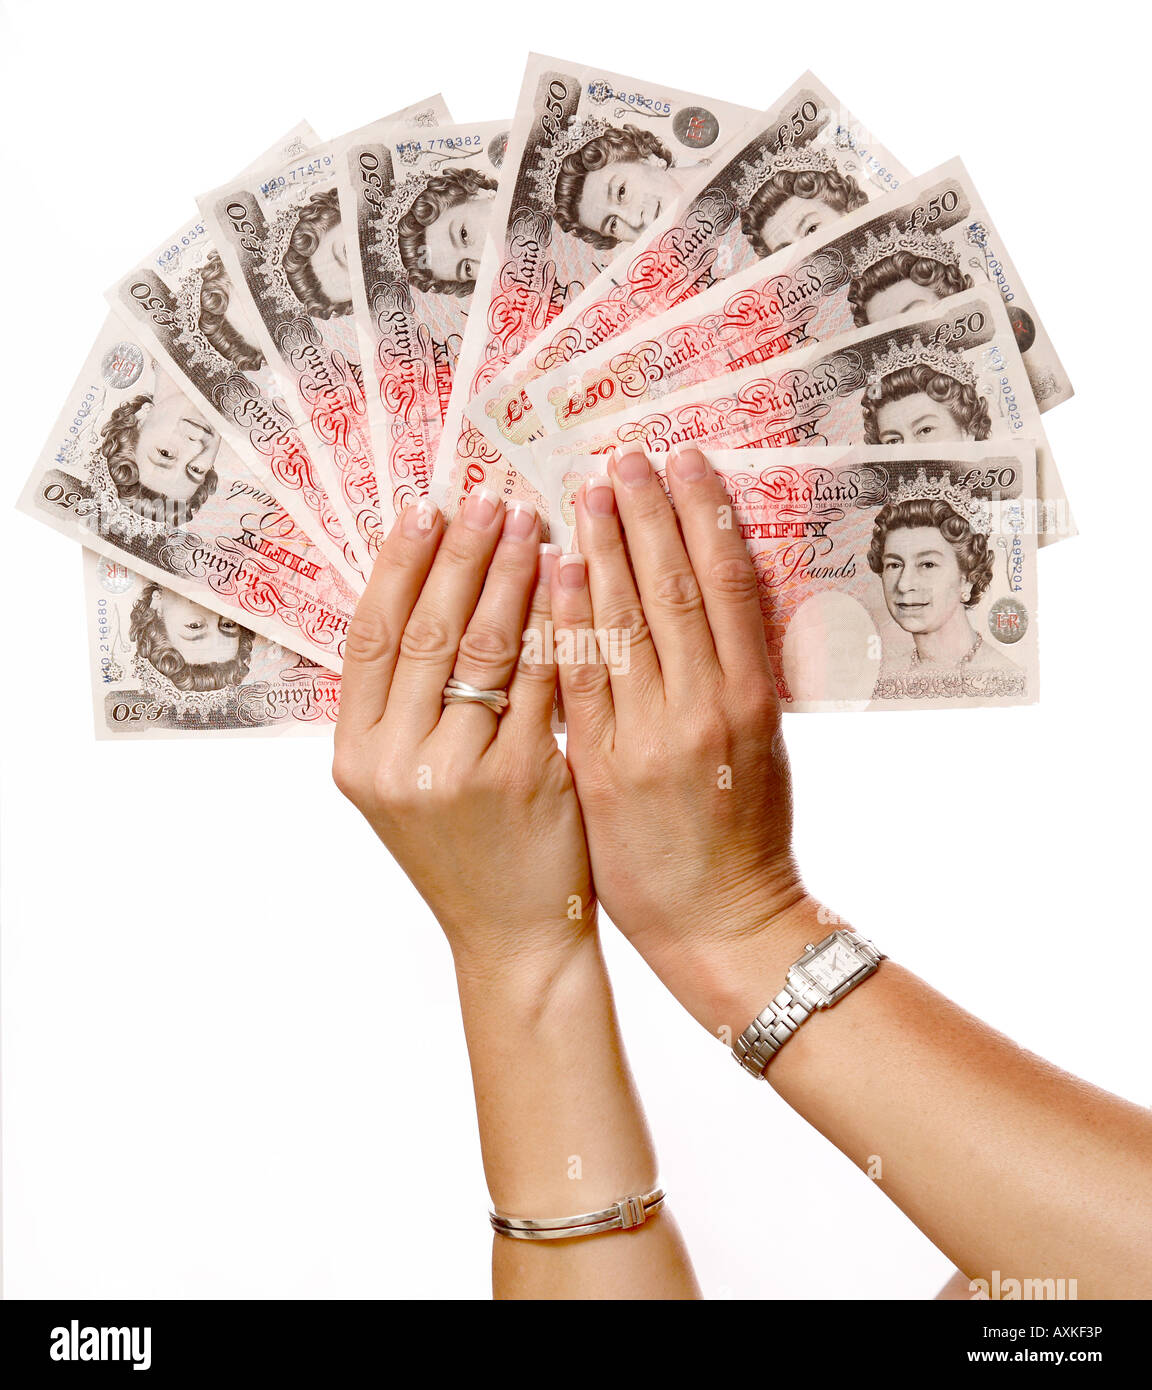 Woman's hands holding £50 notes fanned out Stock Photo